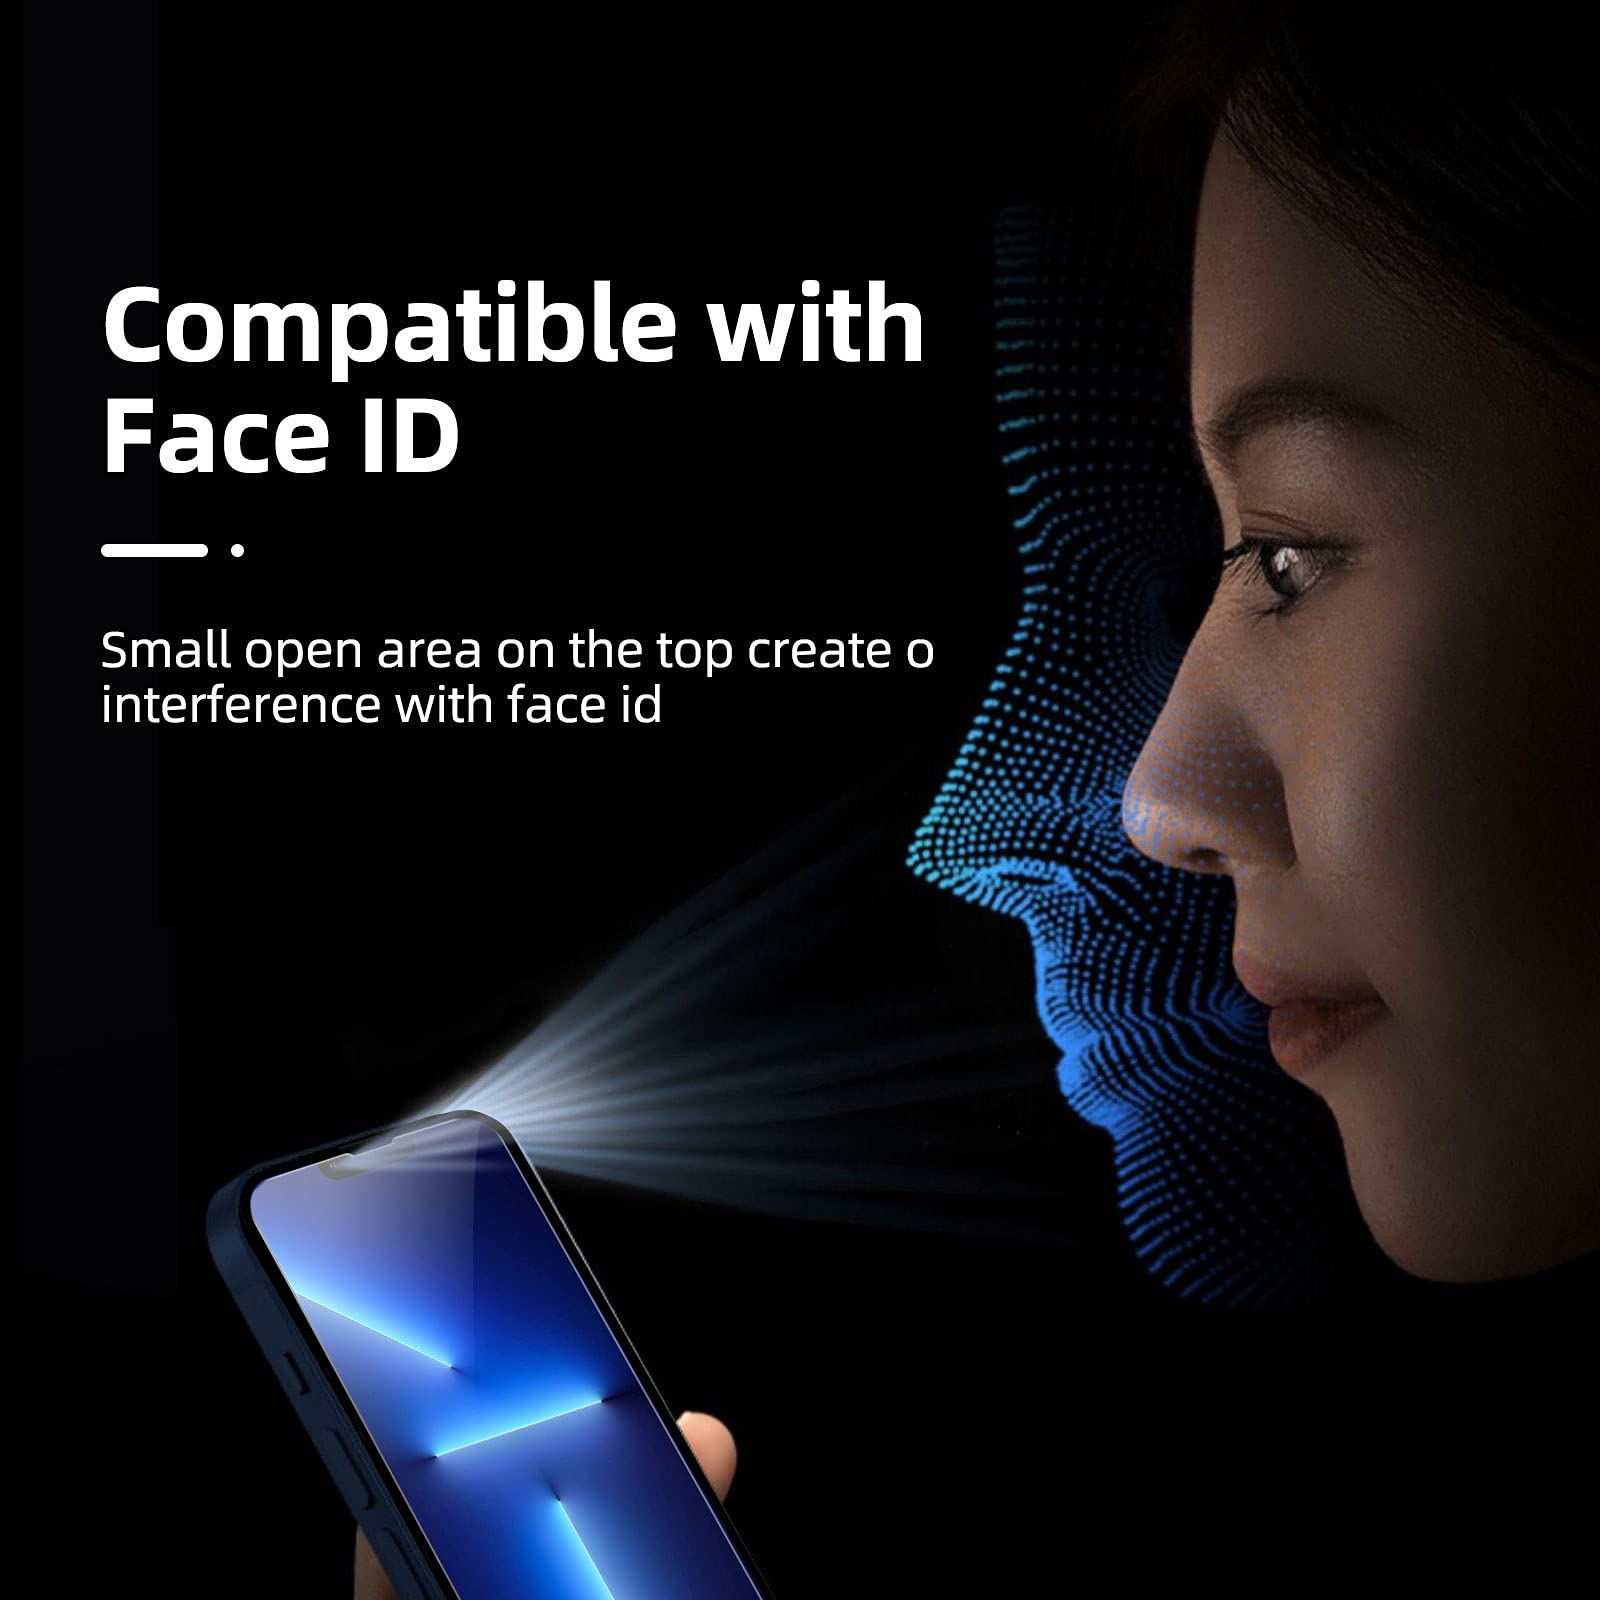 iphone screen protector compatible with face id